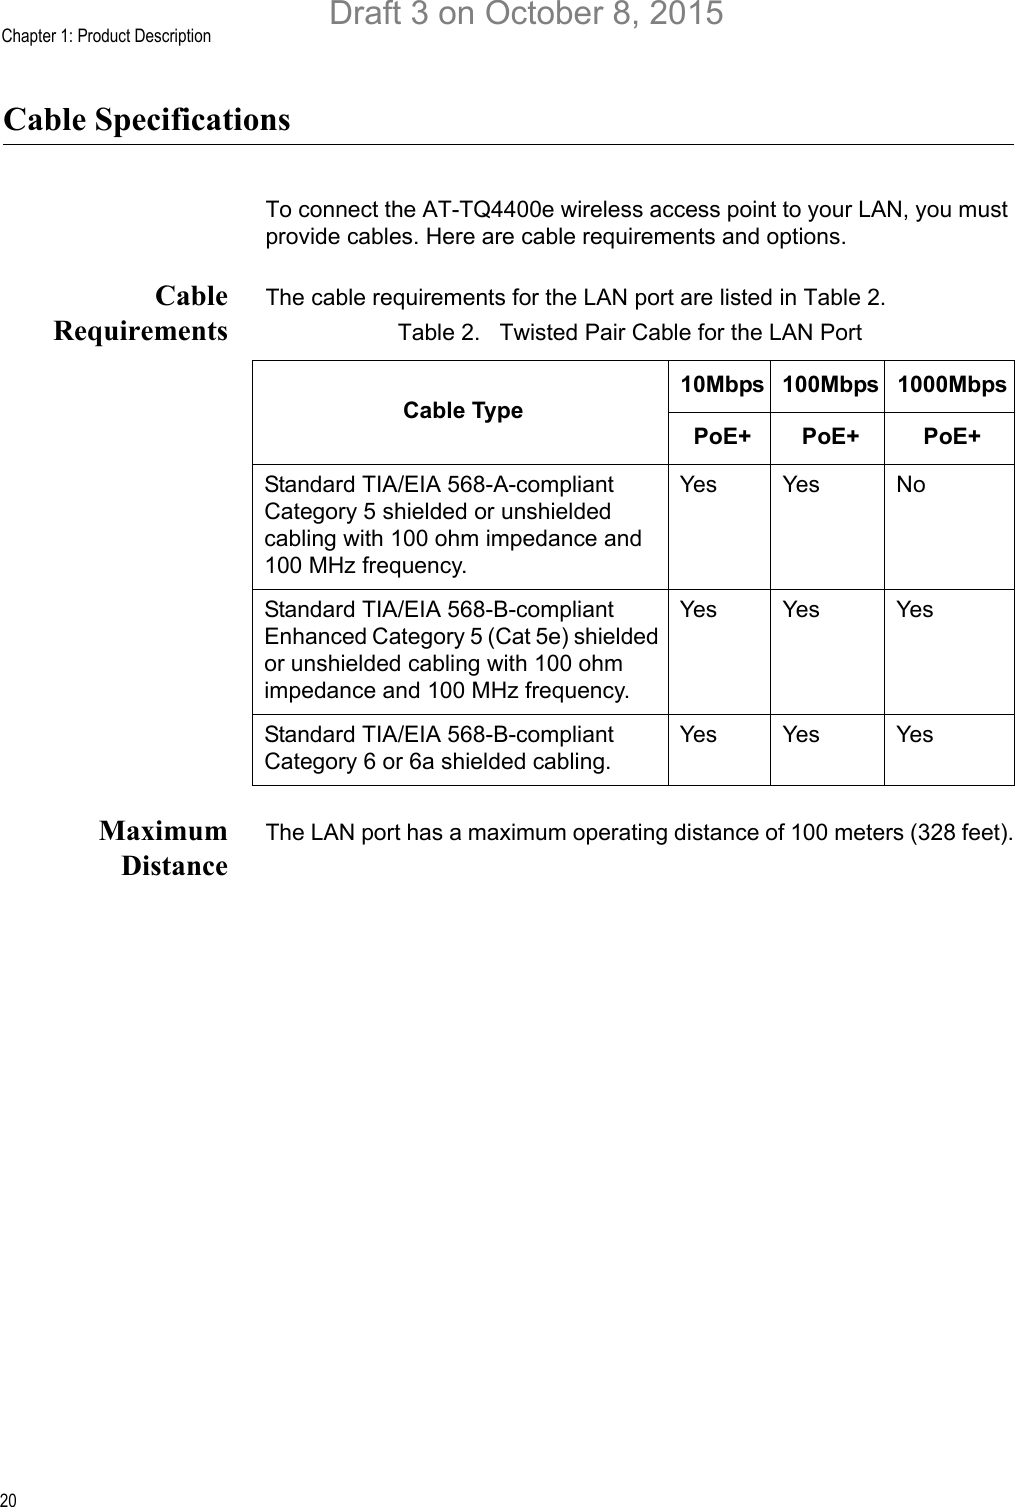 Chapter 1: Product Description20Cable SpecificationsTo connect the AT-TQ4400e wireless access point to your LAN, you must provide cables. Here are cable requirements and options.CableRequirementsThe cable requirements for the LAN port are listed in Table 2.MaximumDistanceThe LAN port has a maximum operating distance of 100 meters (328 feet).Table 2.   Twisted Pair Cable for the LAN PortCable Type10Mbps 100Mbps 1000MbpsPoE+ PoE+ PoE+Standard TIA/EIA 568-A-compliant Category 5 shielded or unshielded cabling with 100 ohm impedance and 100 MHz frequency.Yes Yes NoStandard TIA/EIA 568-B-compliant Enhanced Category 5 (Cat 5e) shielded or unshielded cabling with 100 ohm impedance and 100 MHz frequency.Yes Yes YesStandard TIA/EIA 568-B-compliant Category 6 or 6a shielded cabling.Yes Yes YesDraft 3 on October 8, 2015